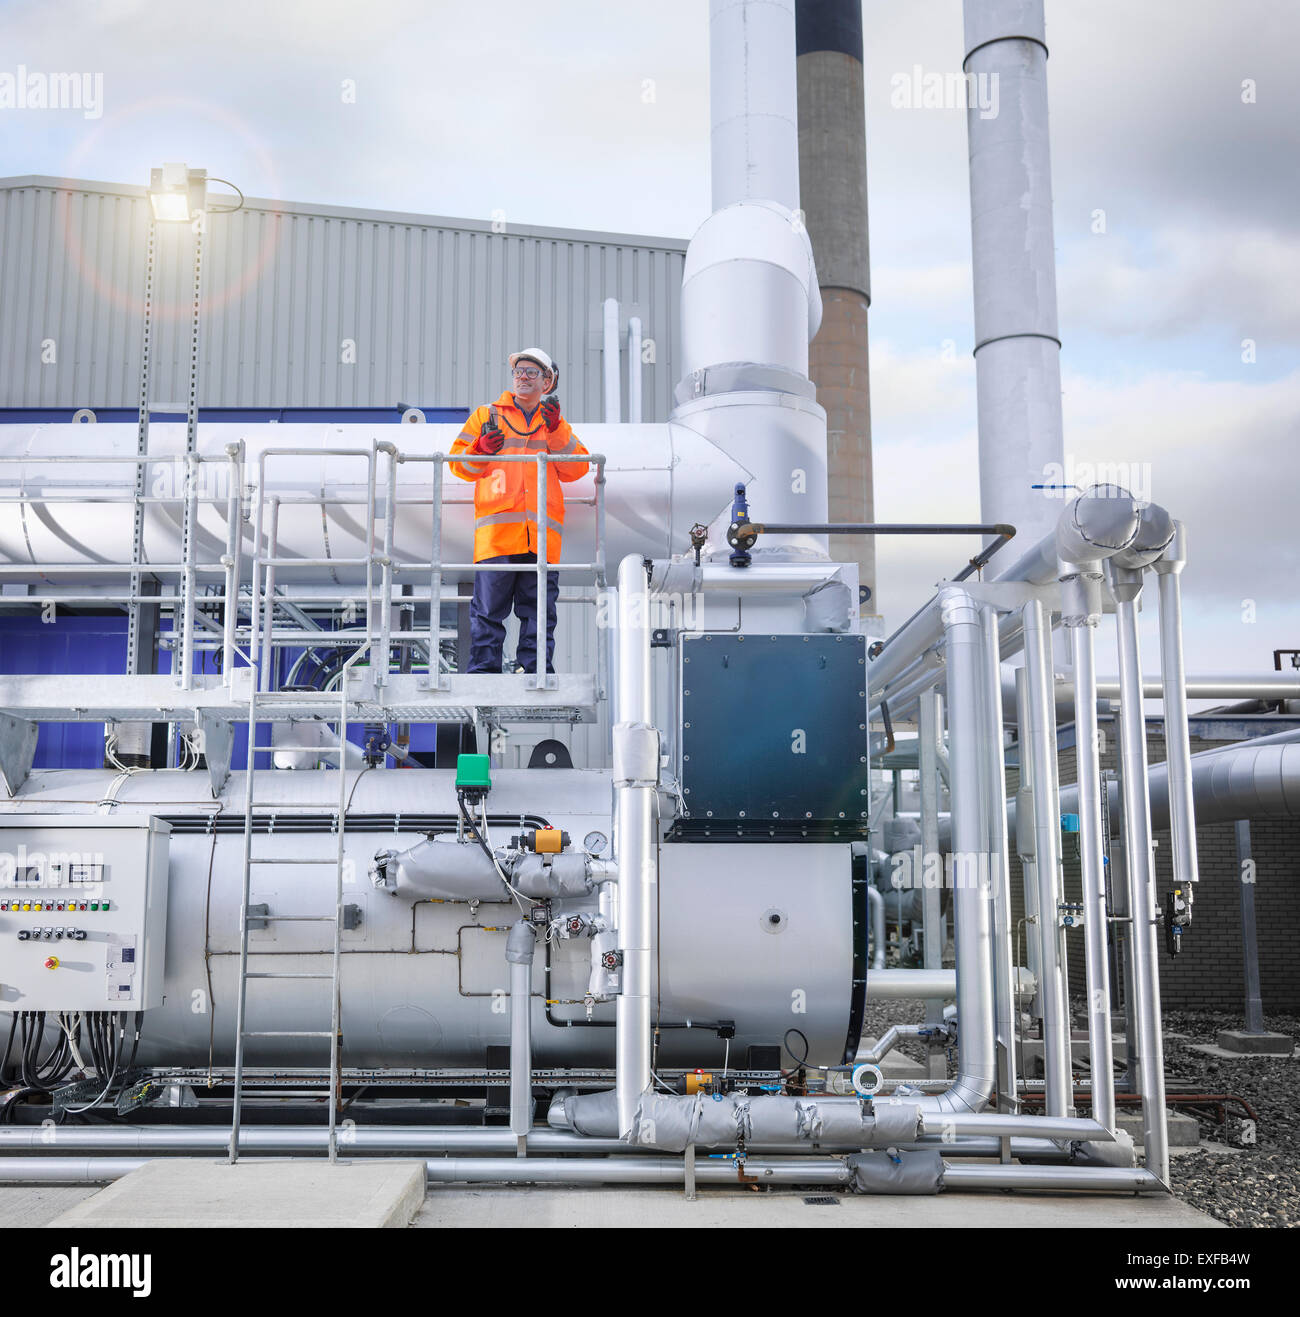 Worker standing amongst pipework of gas fired power station Stock Photo